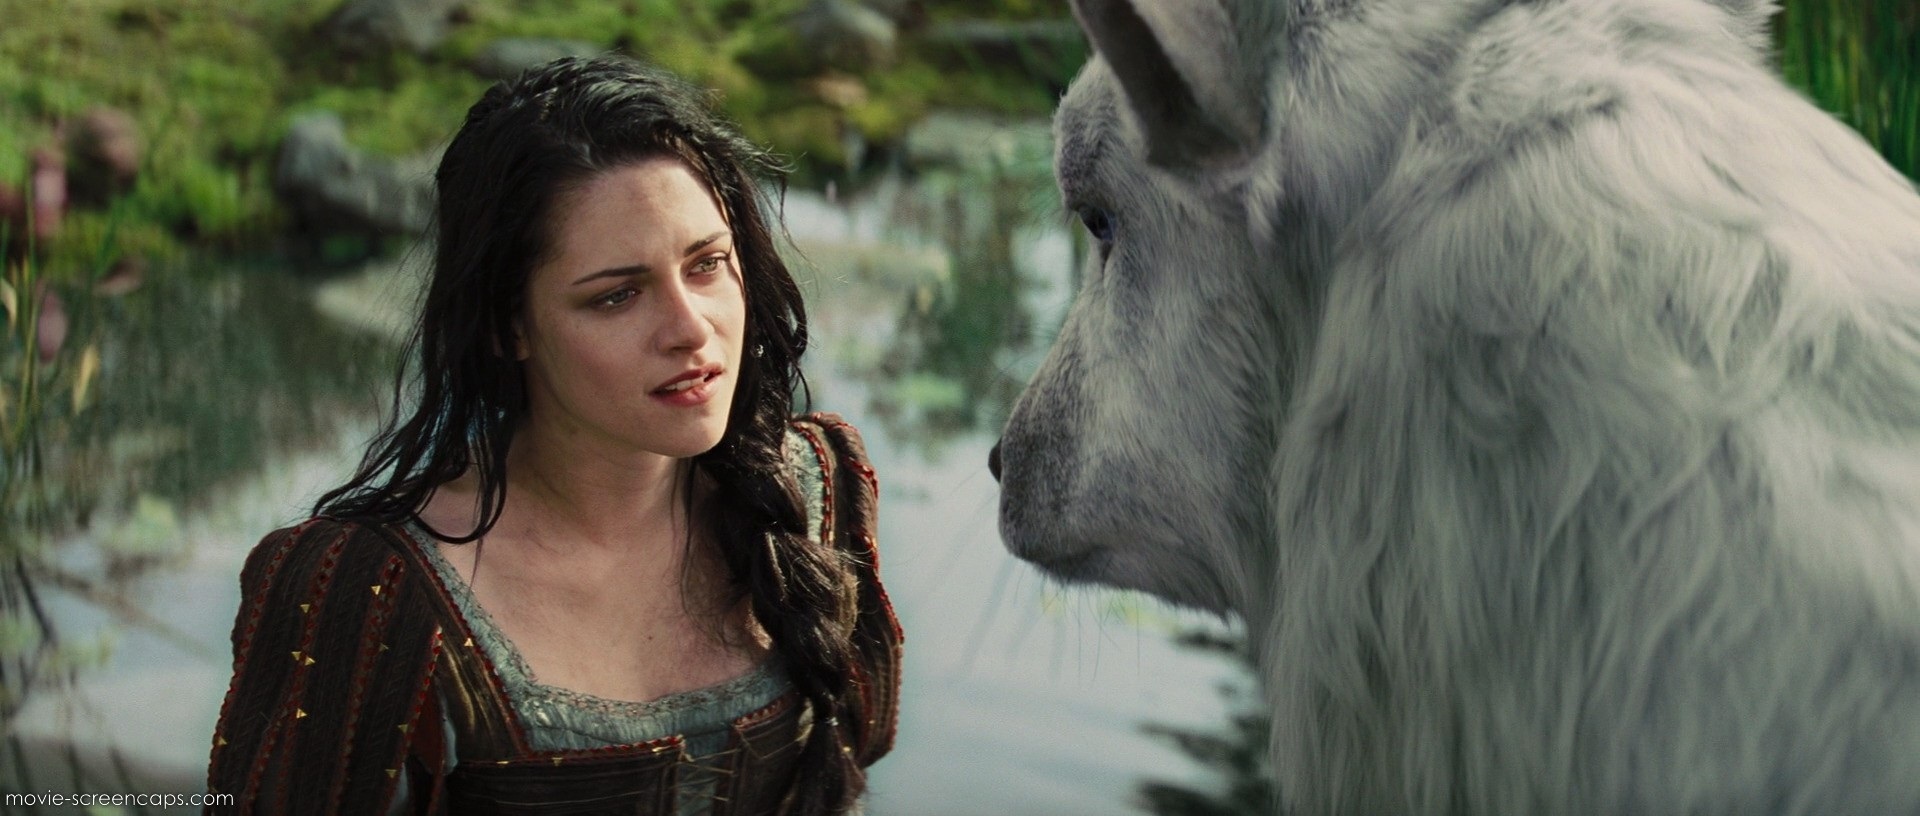 2012 Snow White And The Huntsman